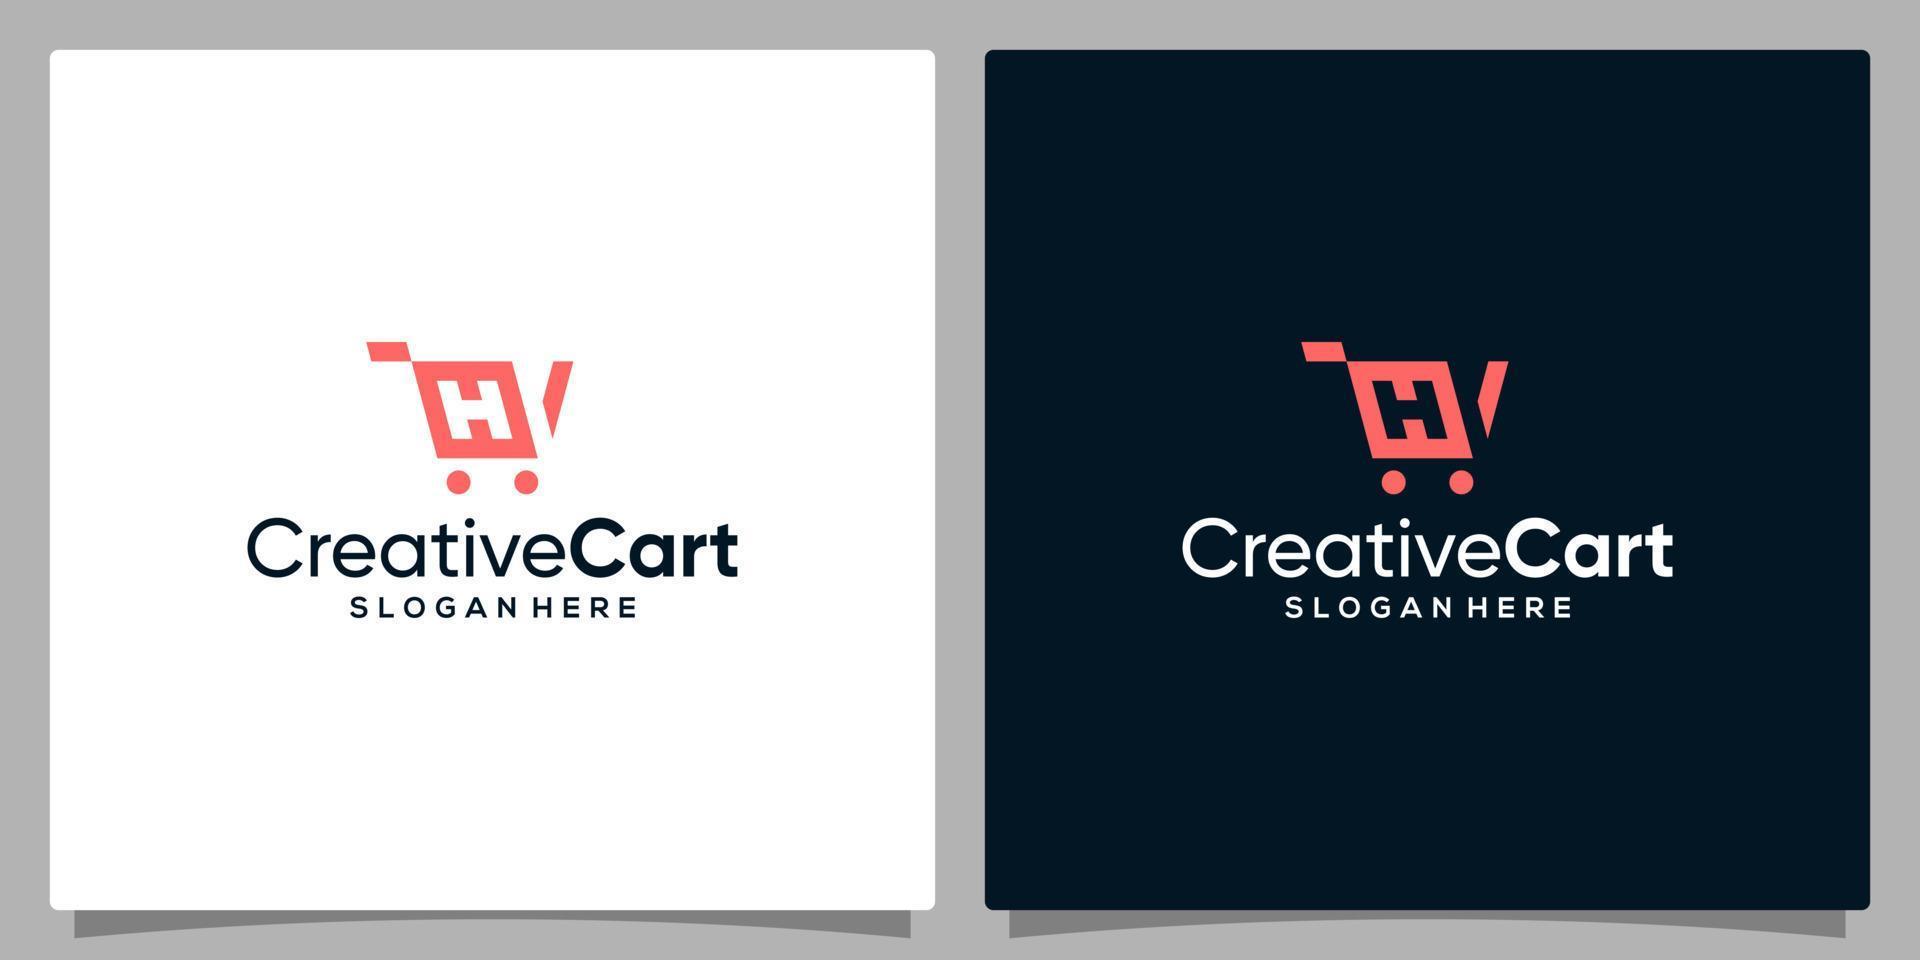 Template design icon logo vector shopping cart abstract with symbol initial letter H. Premium vector